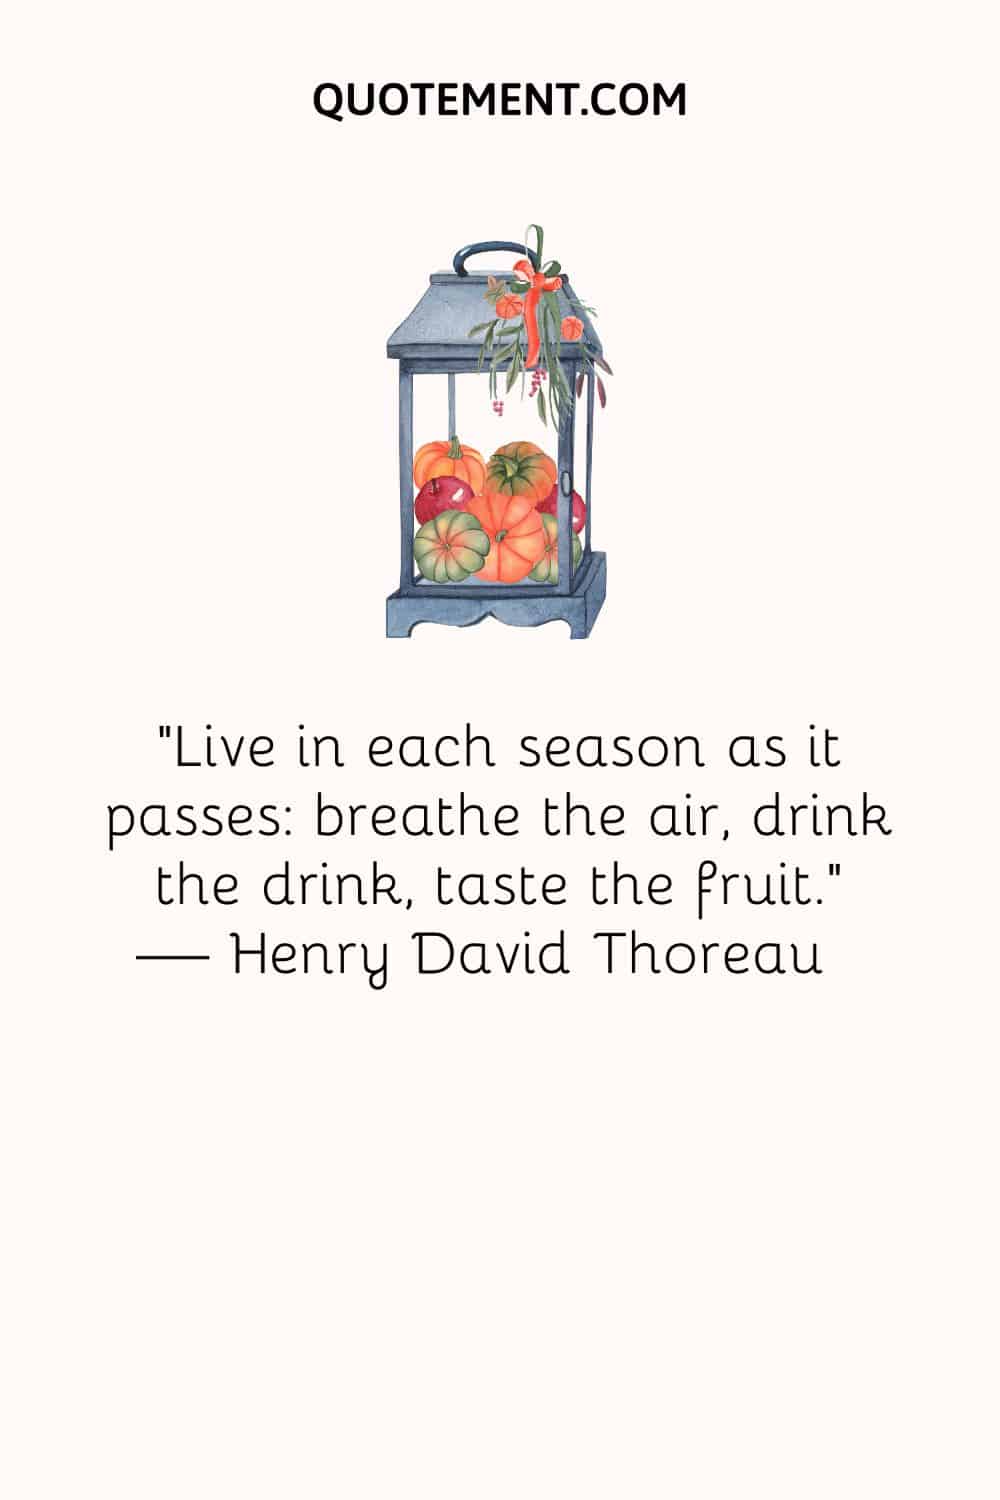 “Live in each season as it passes breathe the air, drink the drink, taste the fruit.” — Henry David Thoreau